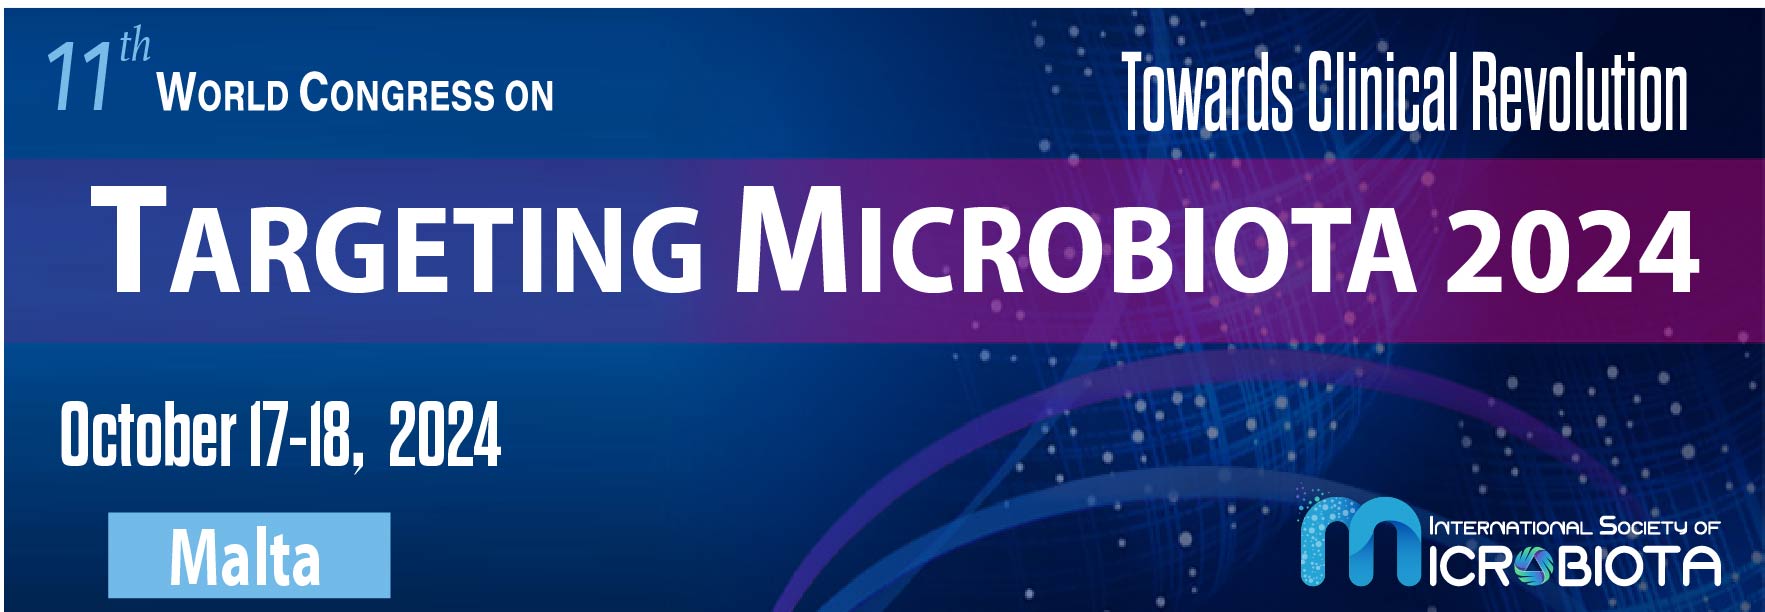 11th World Congress on Targeting Microbiota will be held on October 17-18, 2024 in Malta